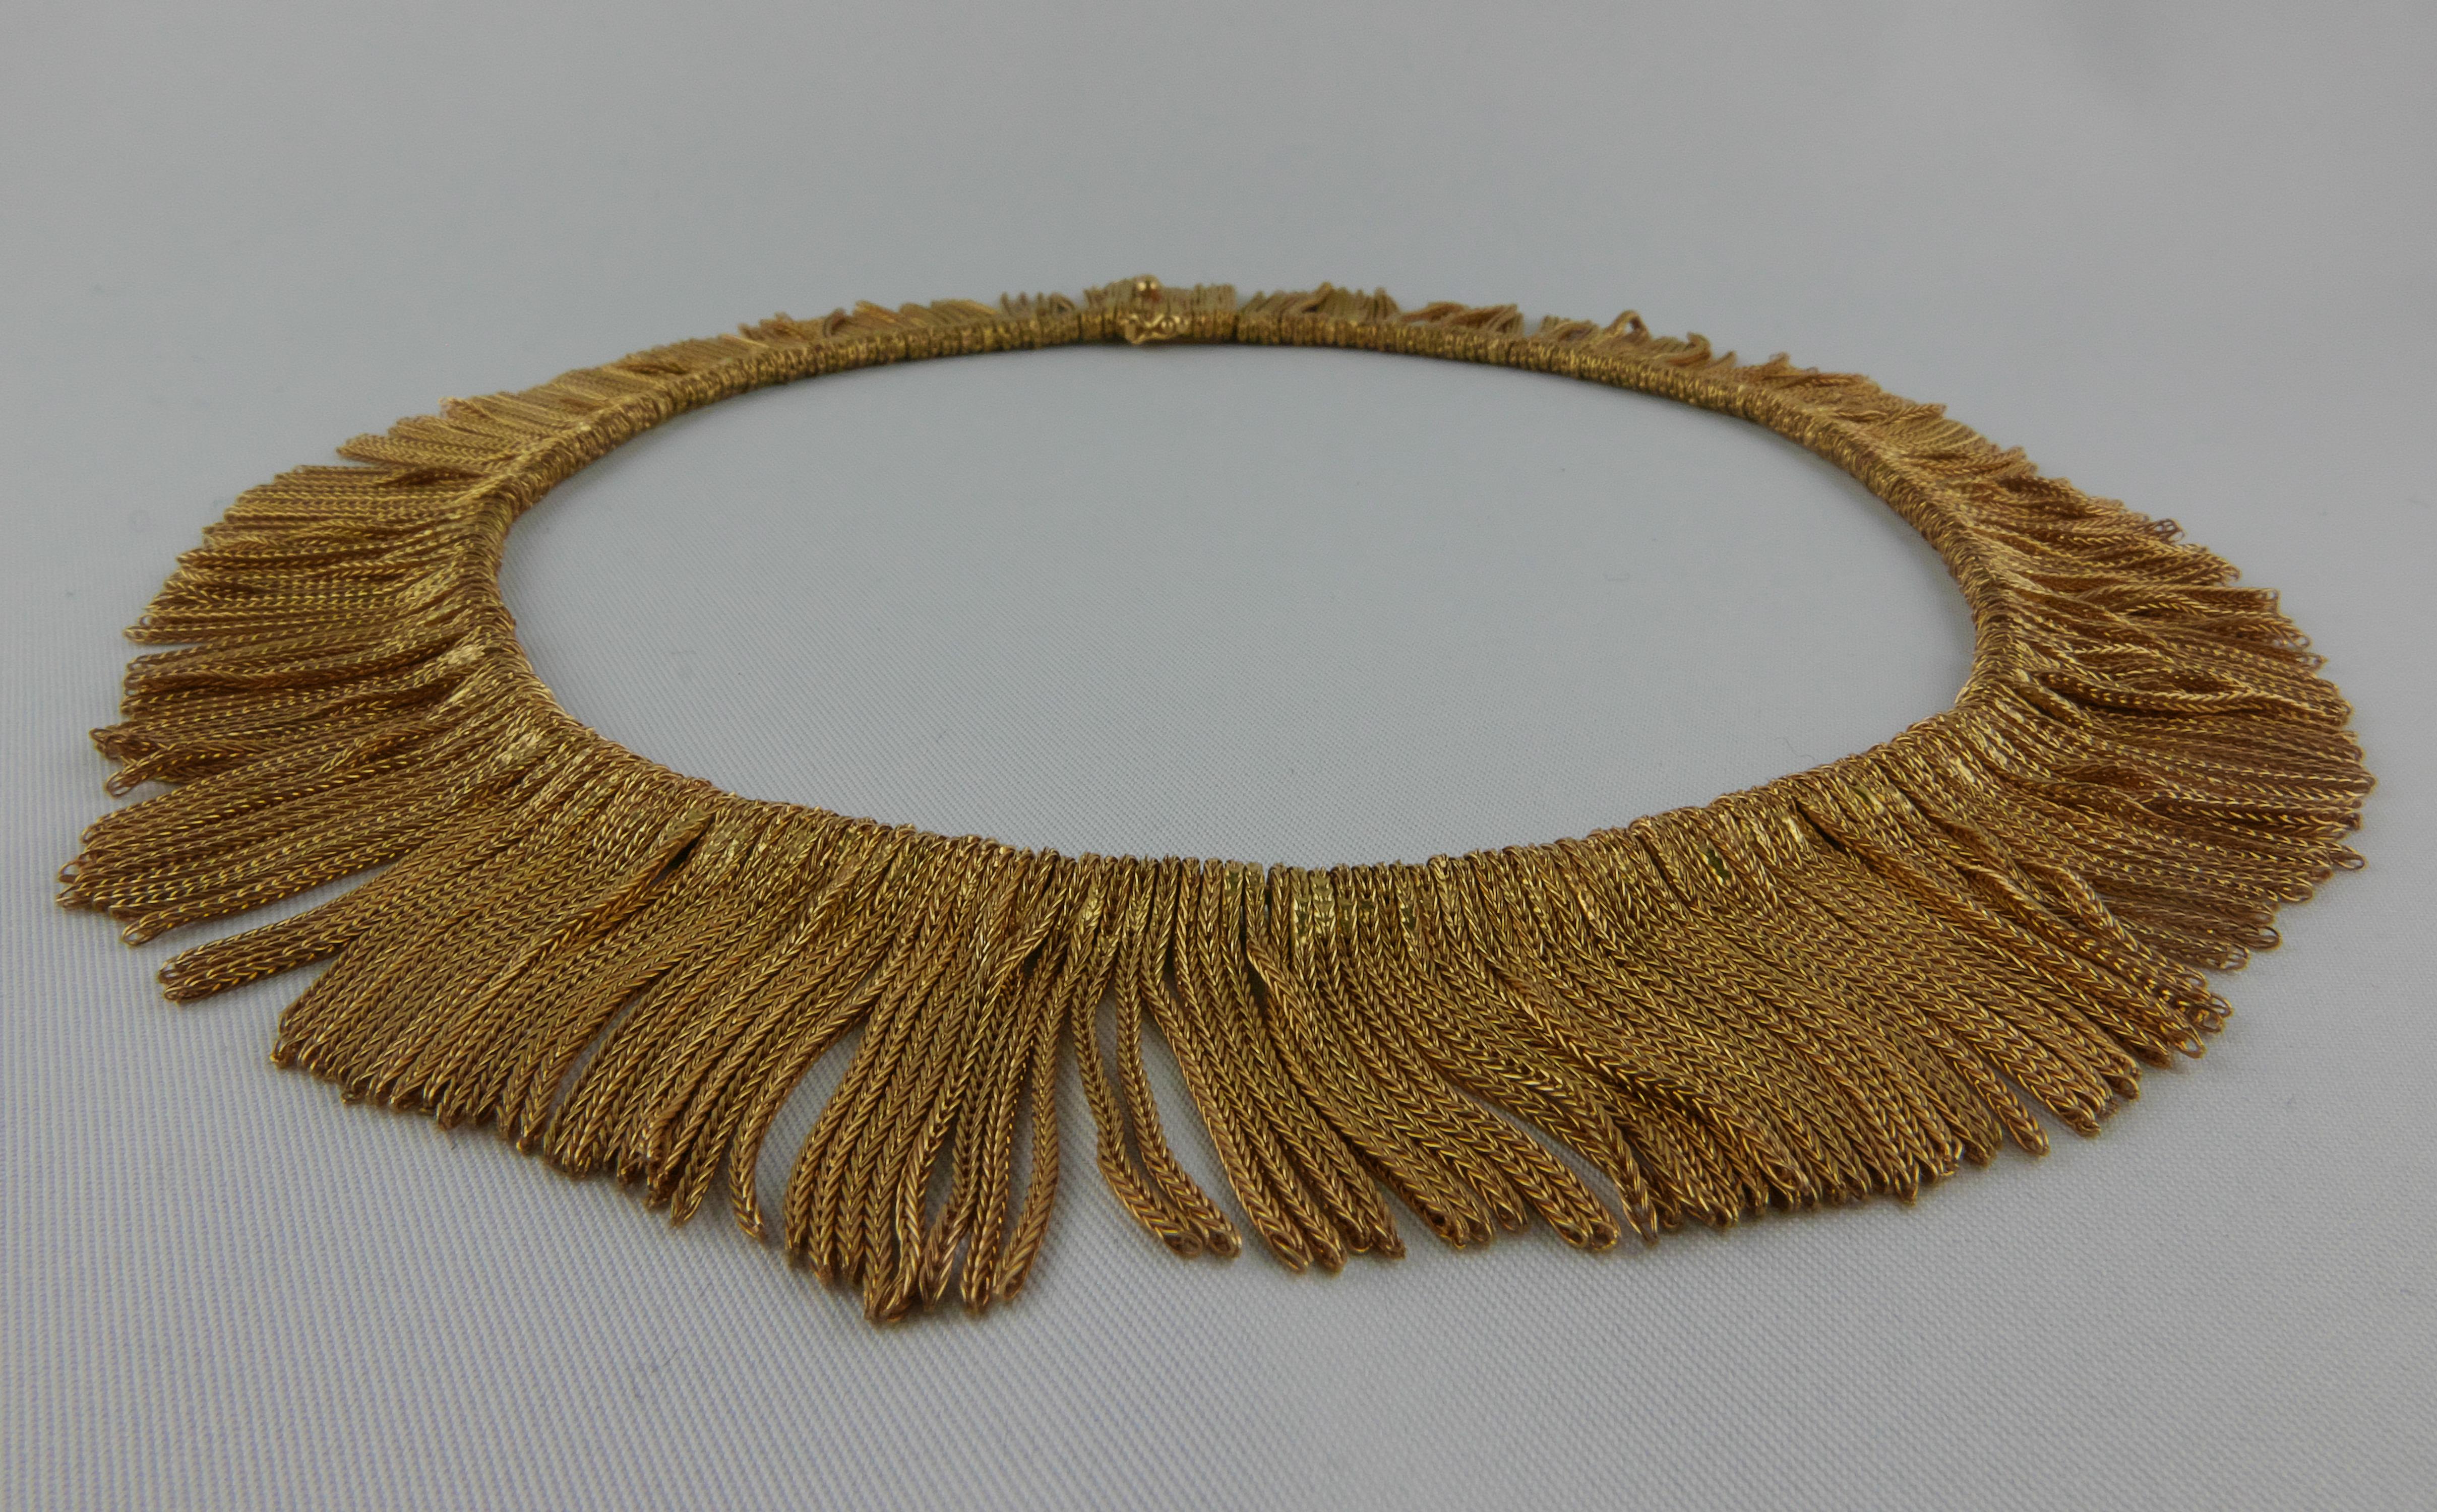 A 1970’s 18 kt Yellow Gold Necklace reminding the glamour of the 1920s with a silky effect. 
Of fringe design, the Necklace is a rich warm golden colour  composed of a multitude of graduating hand-twisted gold roping precisely interlocked to form a